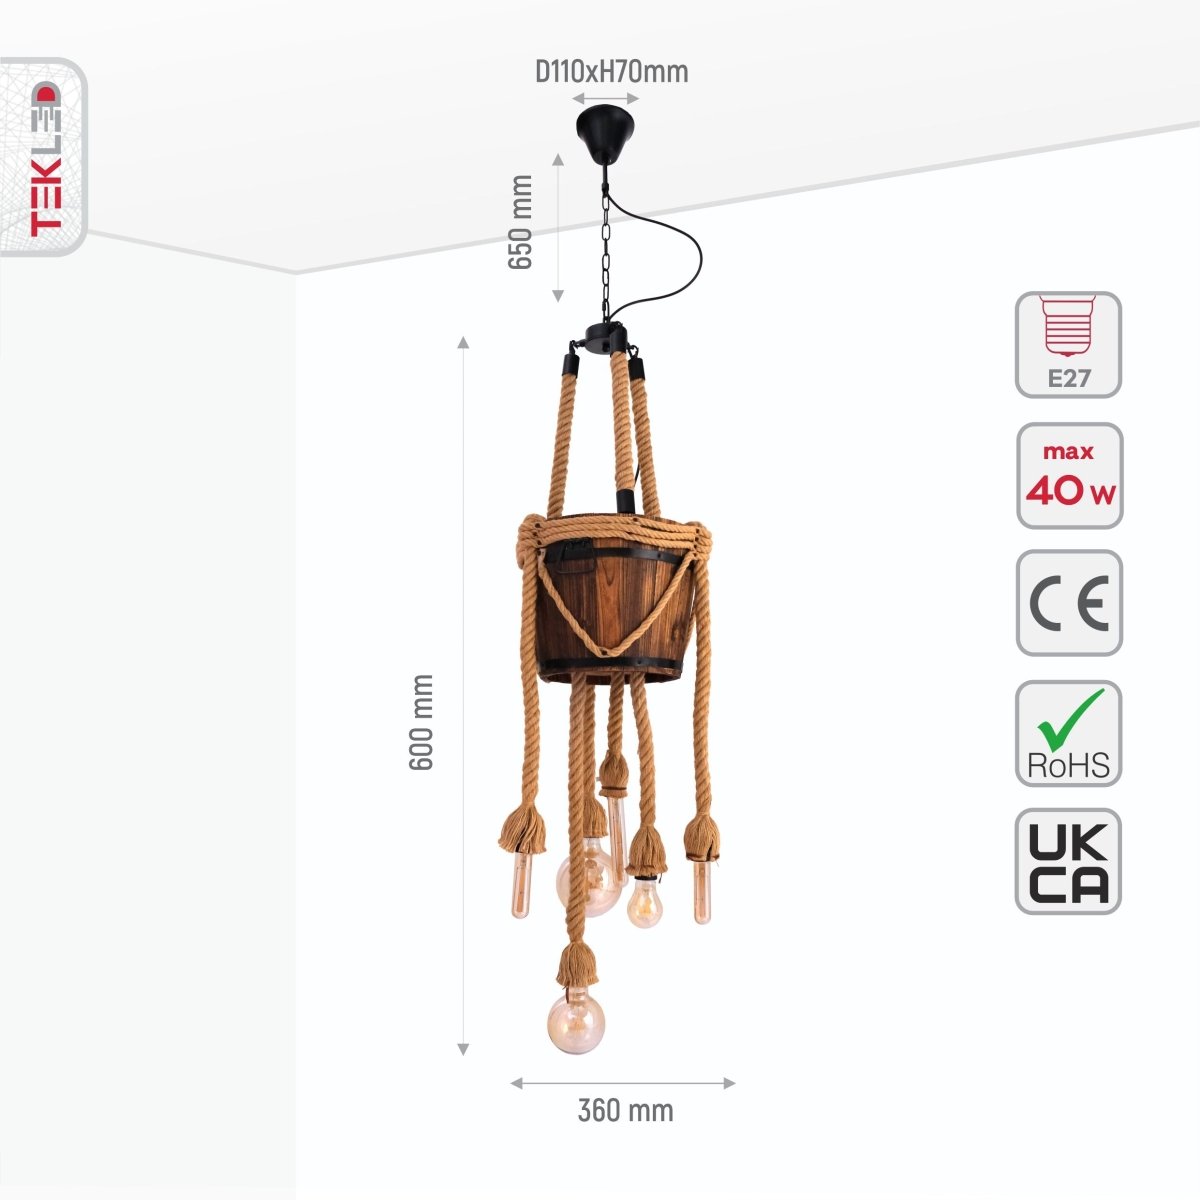 Size and specs of Firewood Basket with 6 Hemp Rope Chandelier E27 Fitting | TEKLED 158-17874